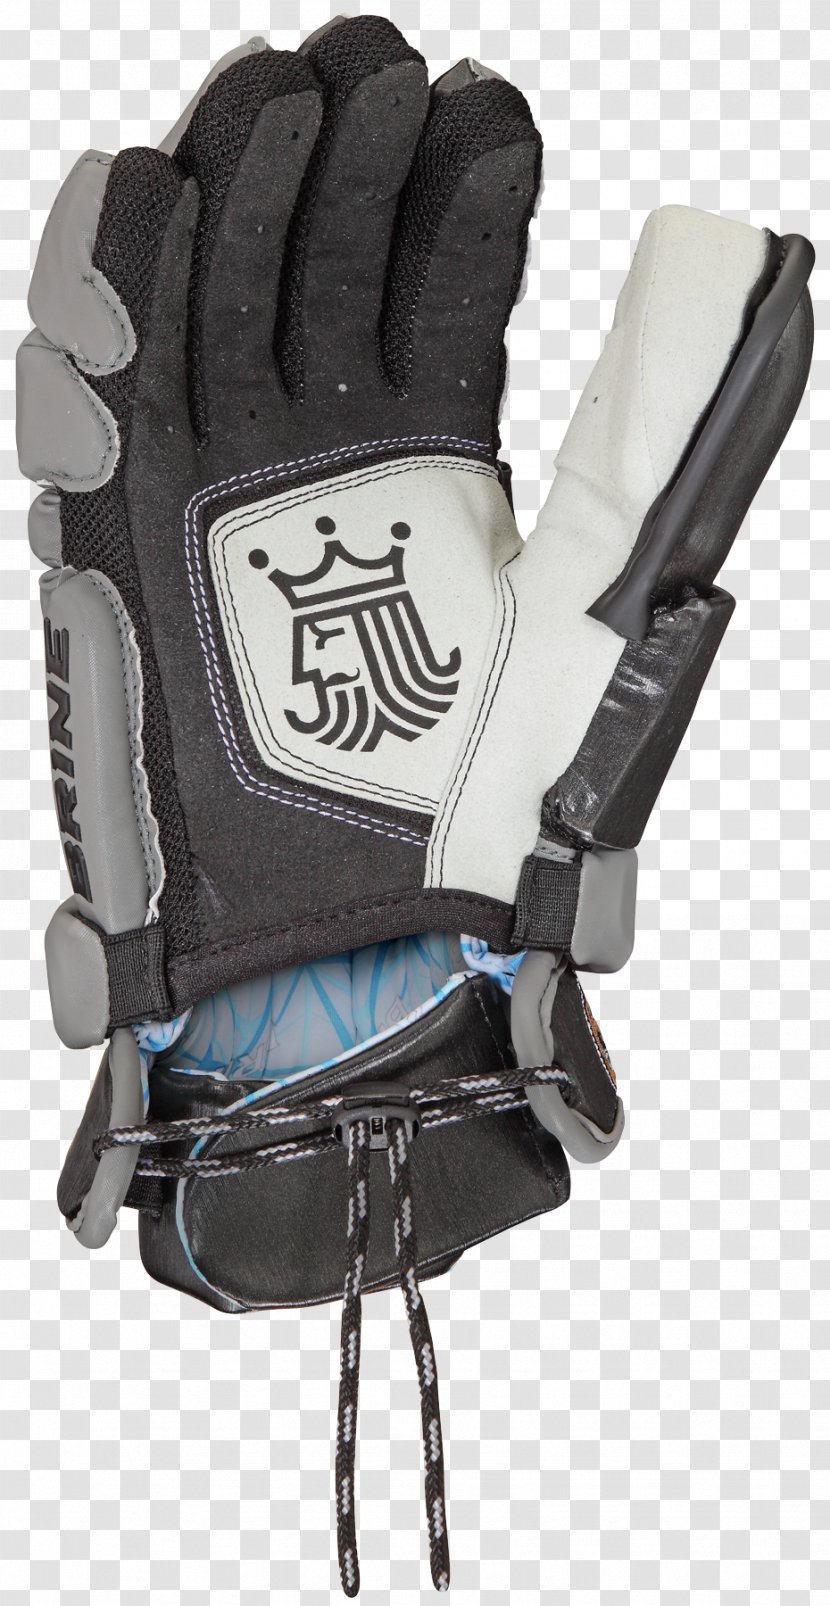 Protective Gear In Sports Personal Equipment Lacrosse Glove Sporting Goods Transparent PNG